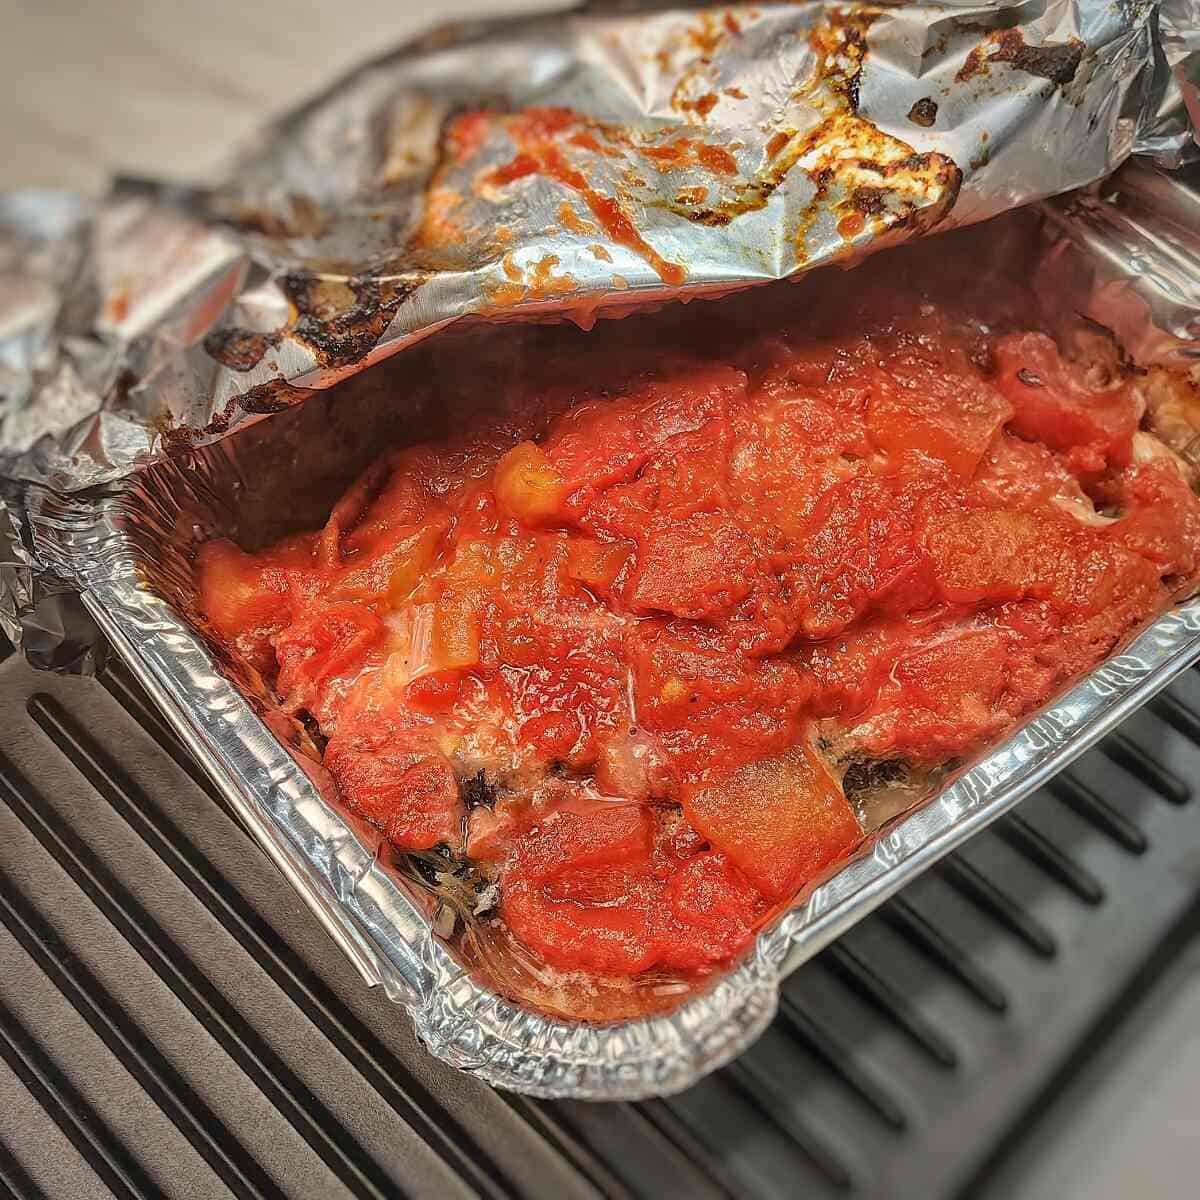 air fryied wolfish with crushed tomatoes